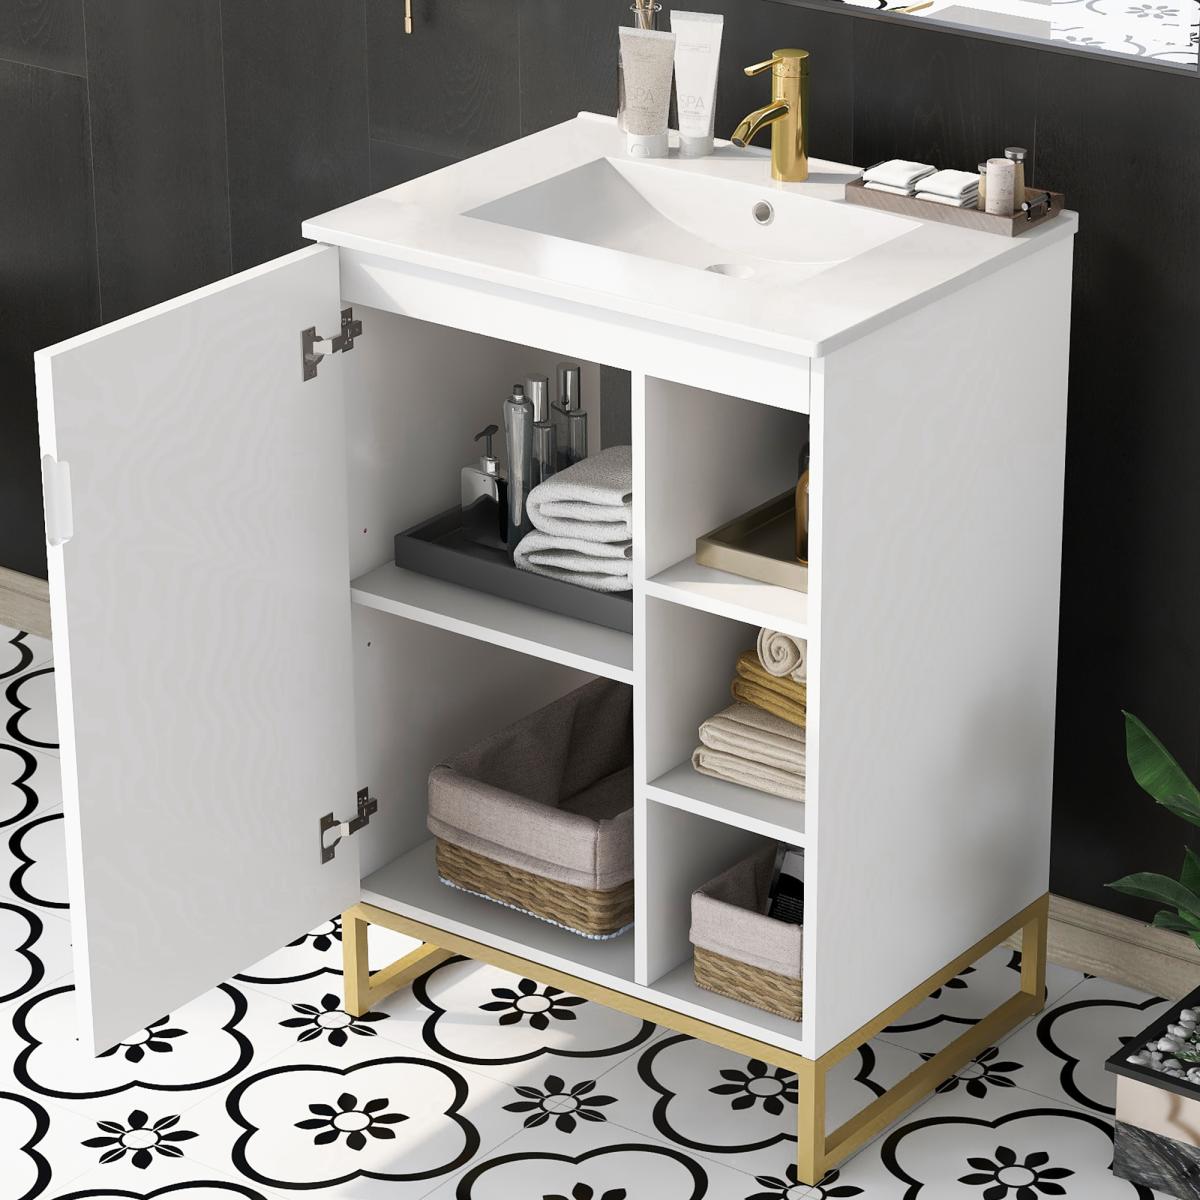 24inch White Bathroom Vanity Sink Combo for Small Space, Modern Design with Ceramic Basin, Gold Legs and Semi-open Storage(Faucet Not Included)